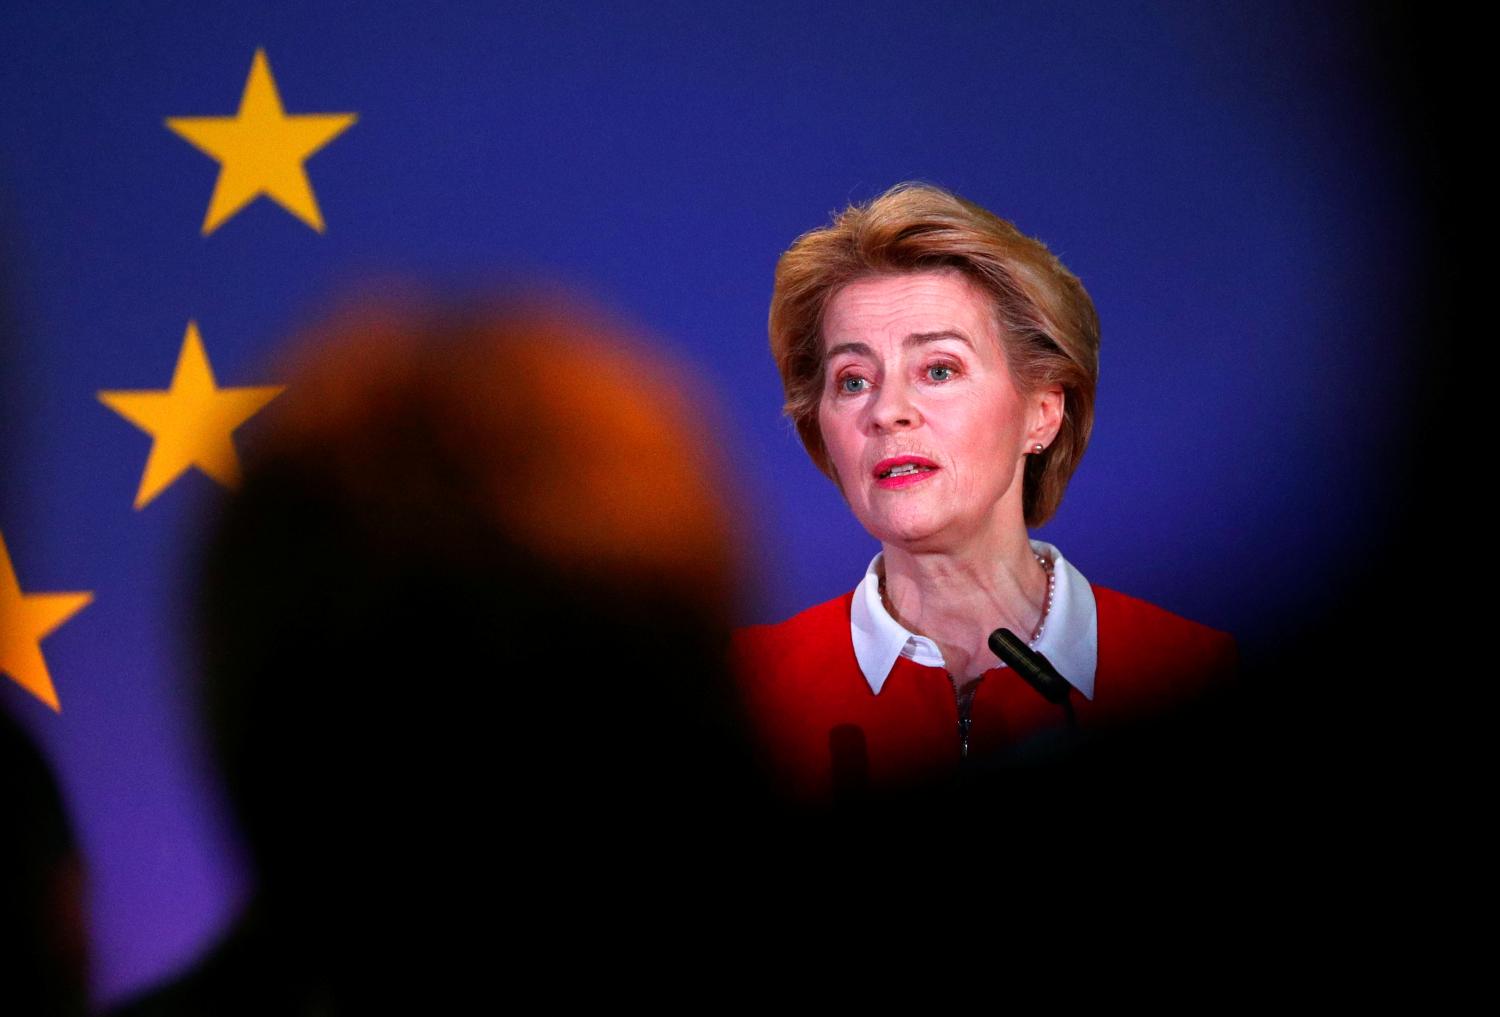 European Commission President Ursula von der Leyen gives a speech on the future of Europe in Brussels, Belgium January 31, 2020. REUTERS/Francois Lenoir